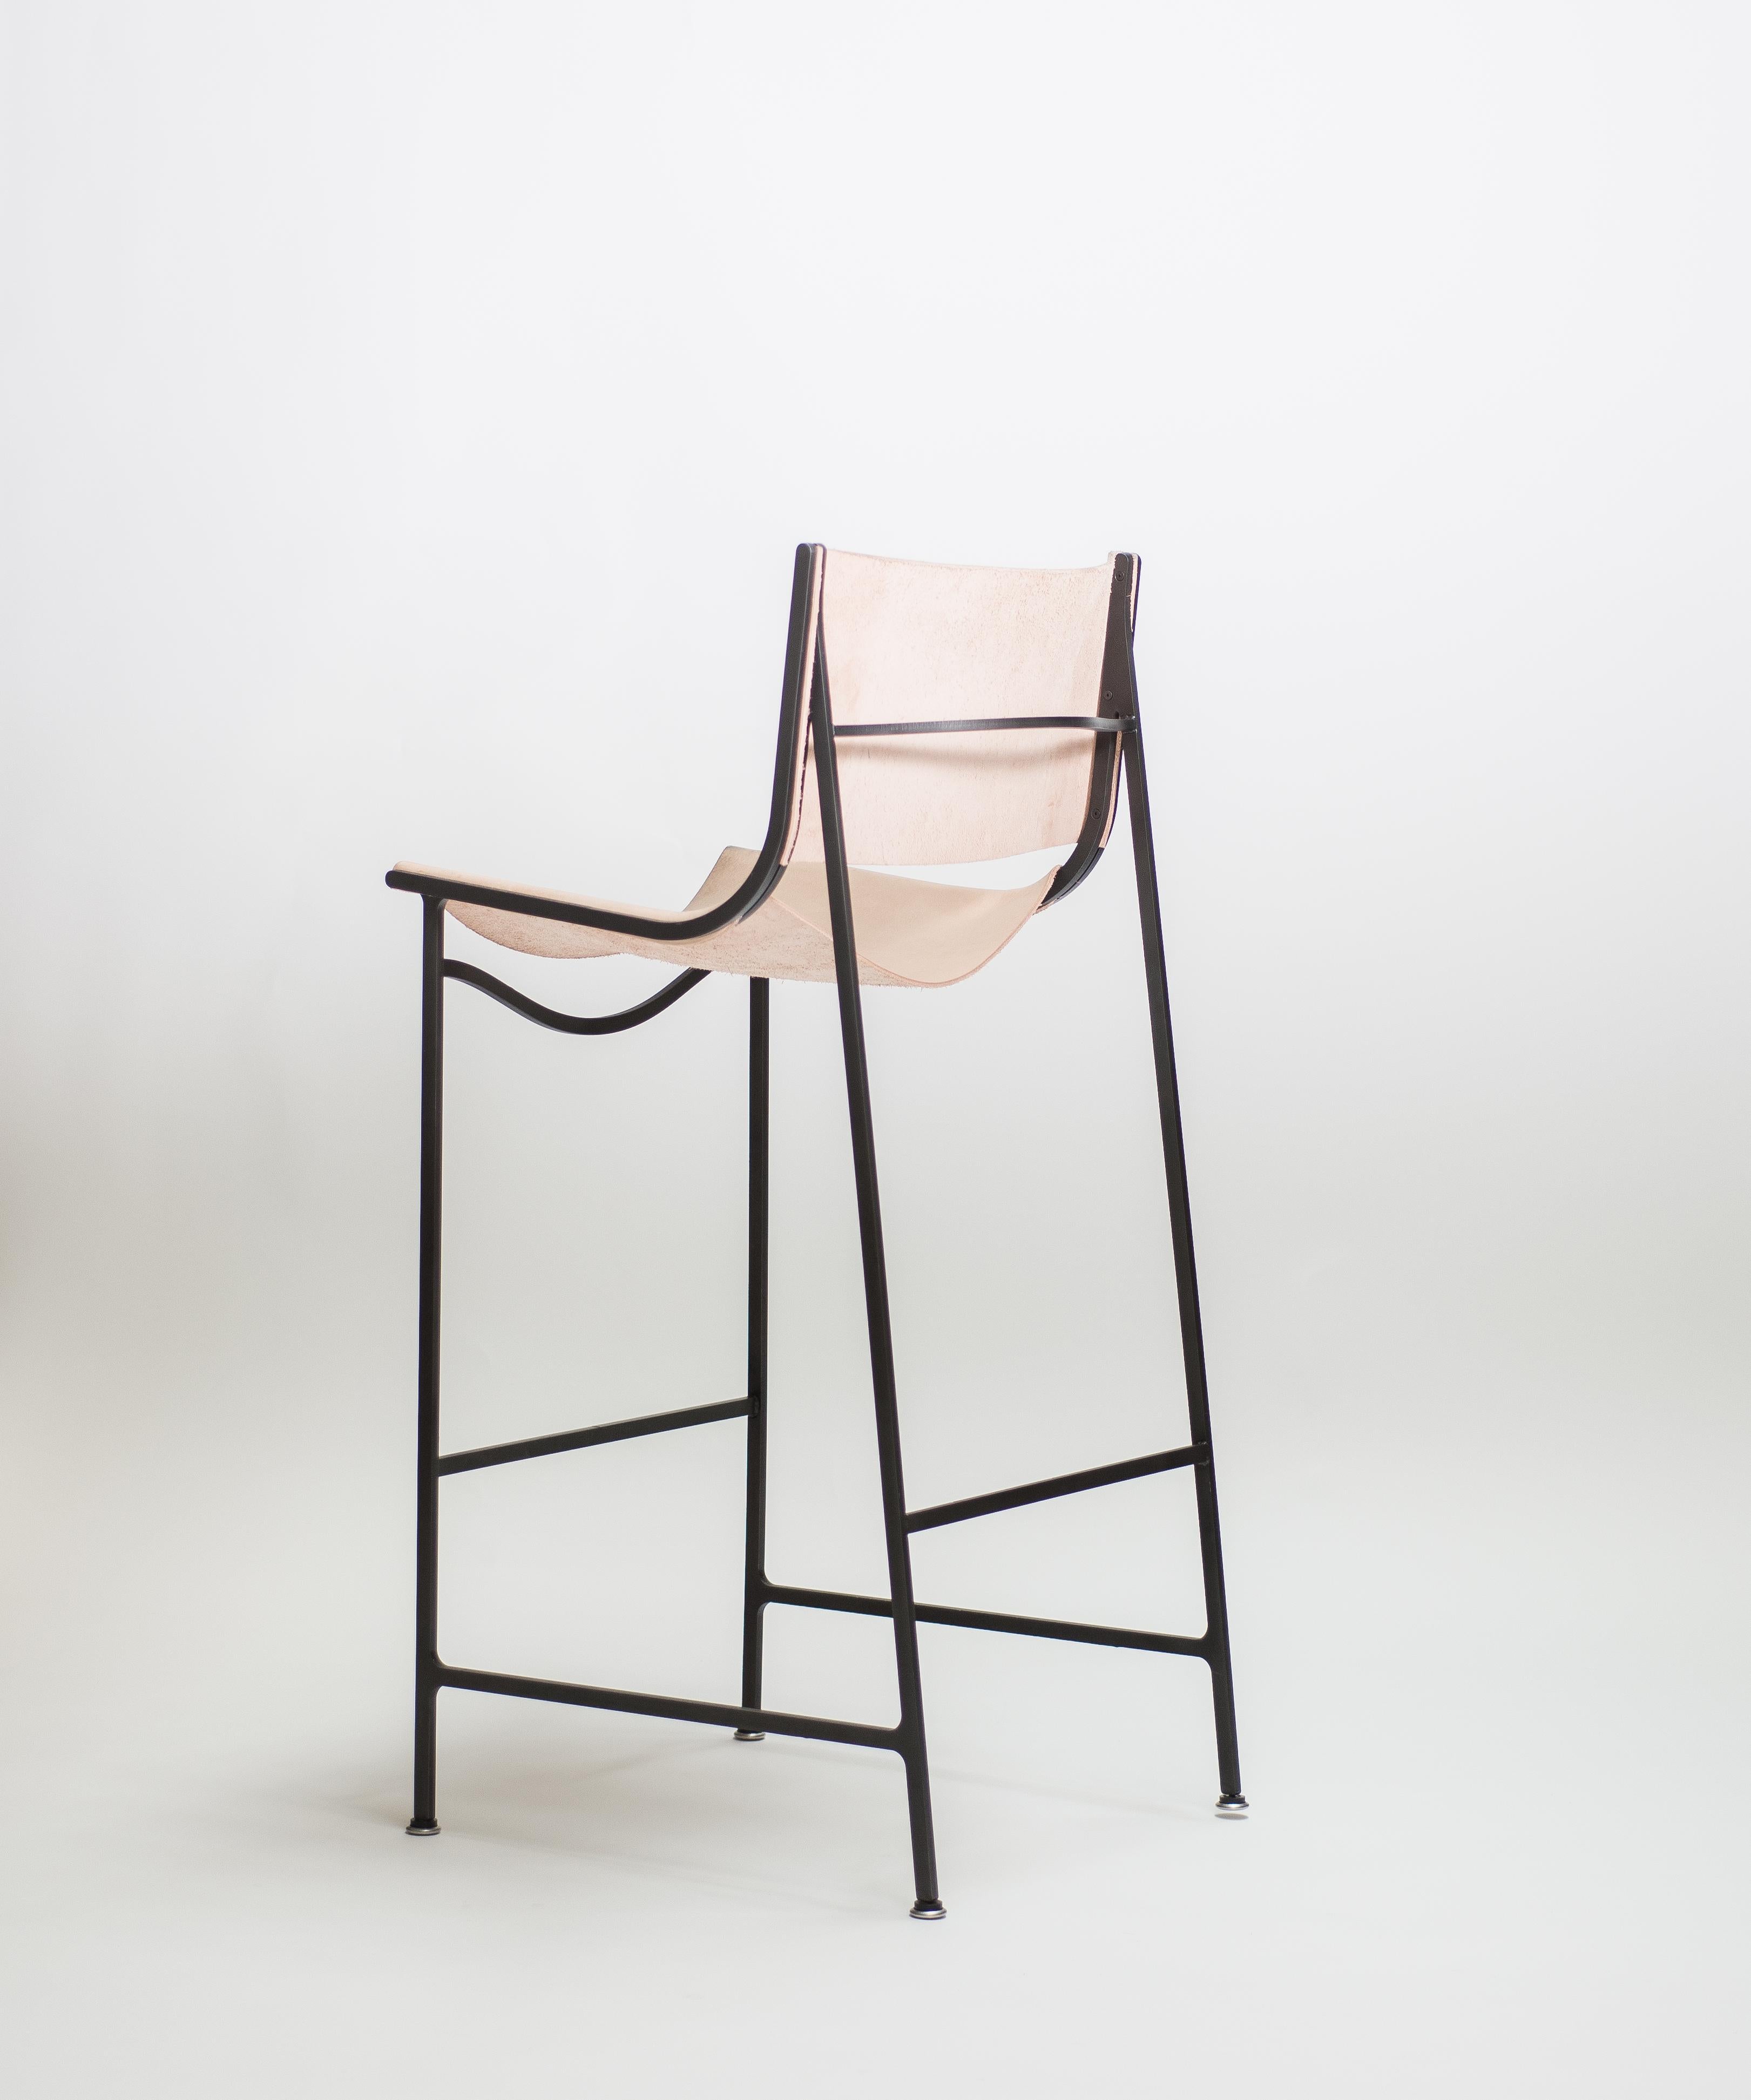 Focused on stripping down and building with simple singular materials, the new addition to the Klein Home collection, bar stool GH, follows fabrication footsteps of the rest of the collection pieces and builds on engagement of lasercut steel